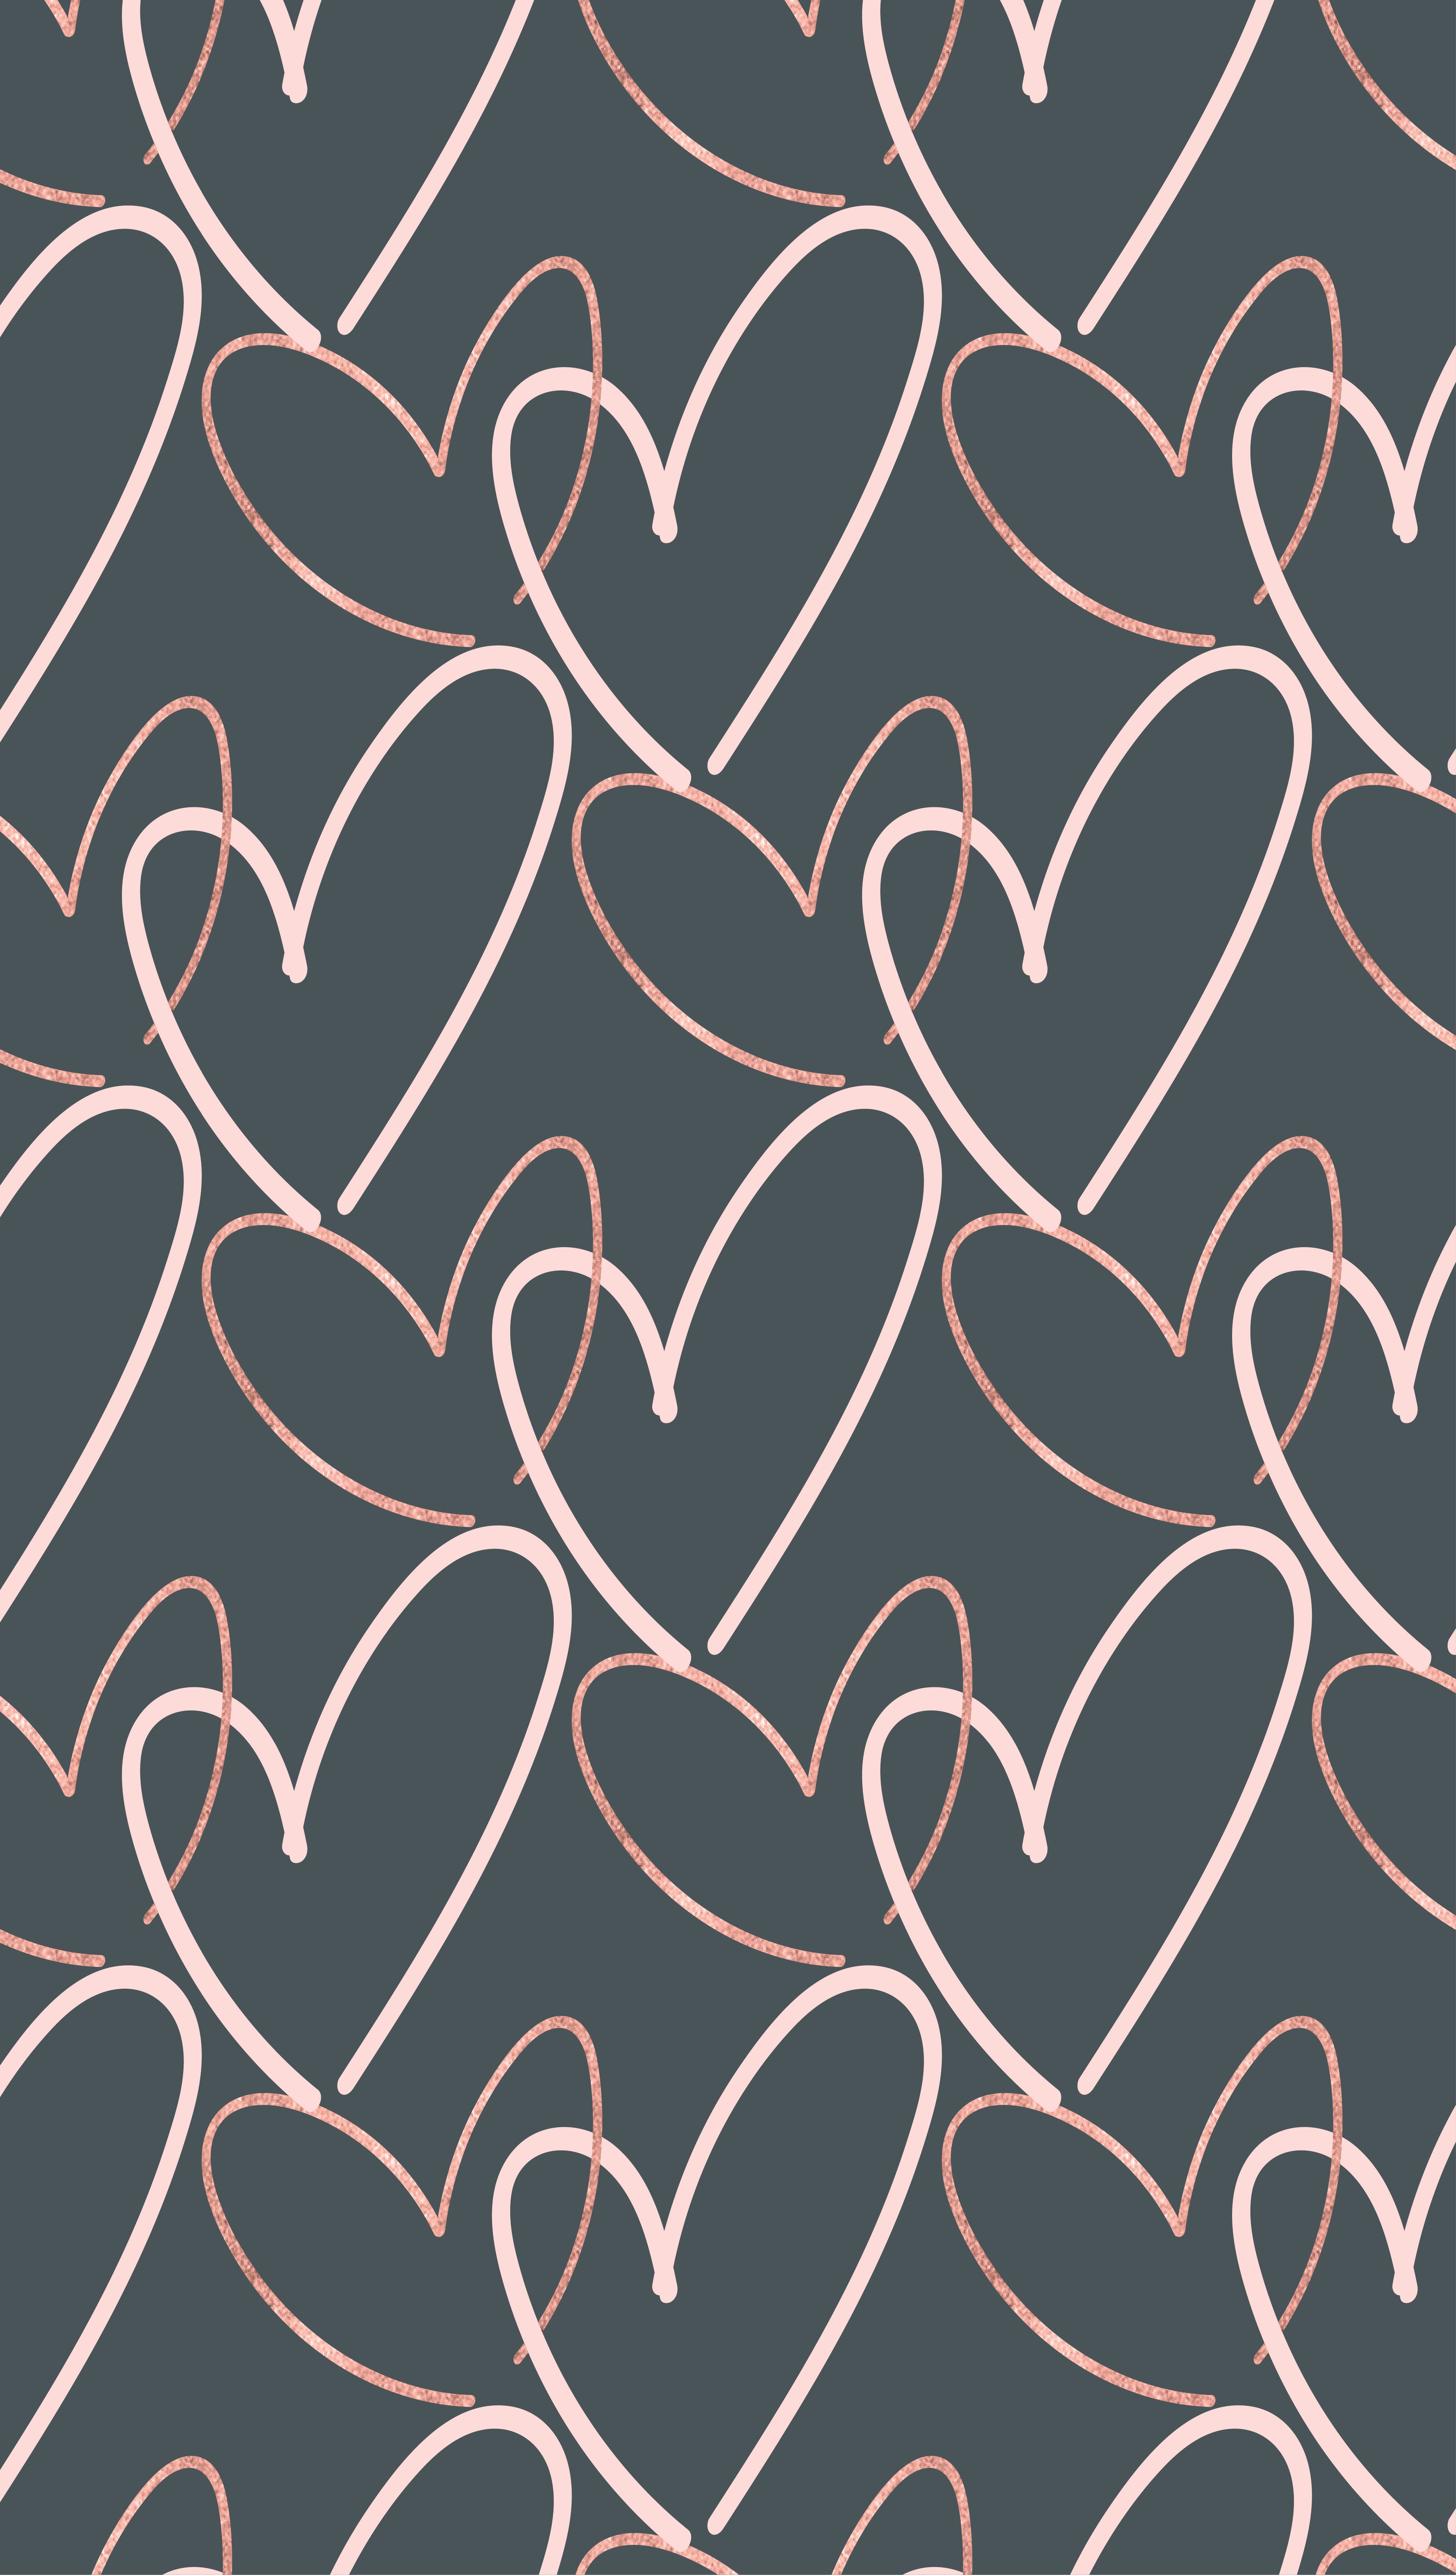 FREE Valentine's Day hearts phone background wallpaper